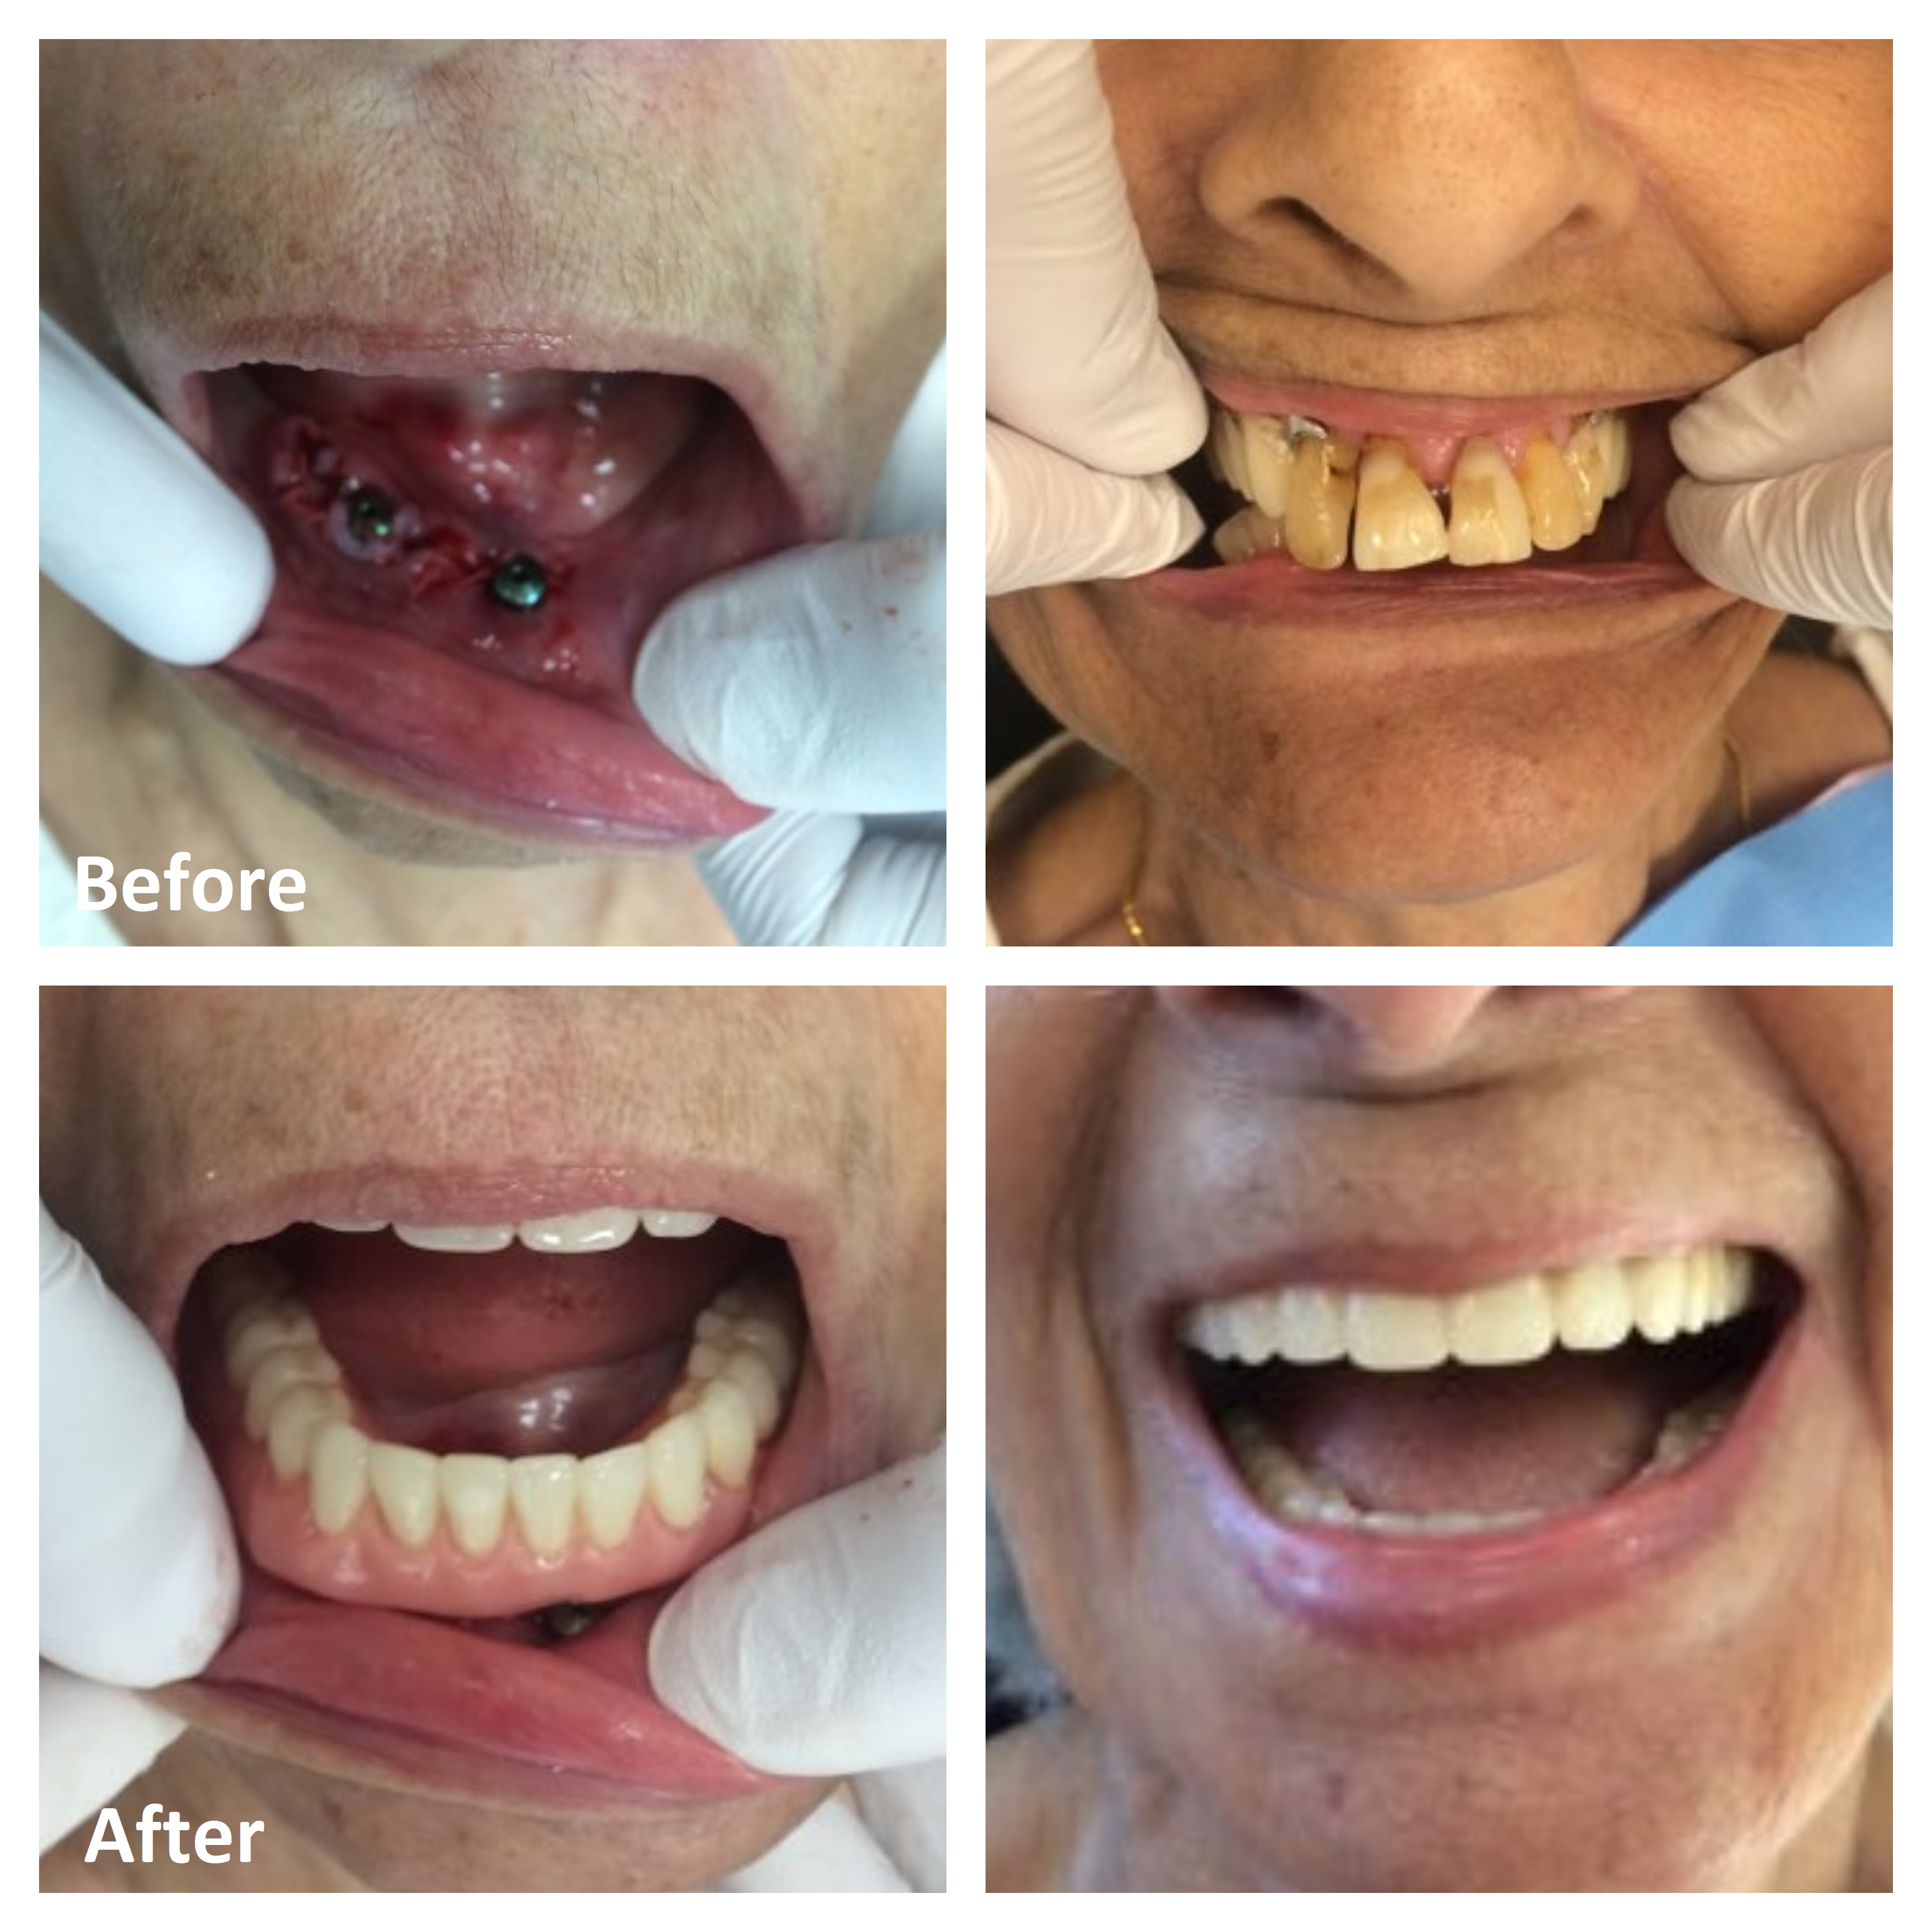 Complete Dentures Before and After Pictures | Denturist Ottawa